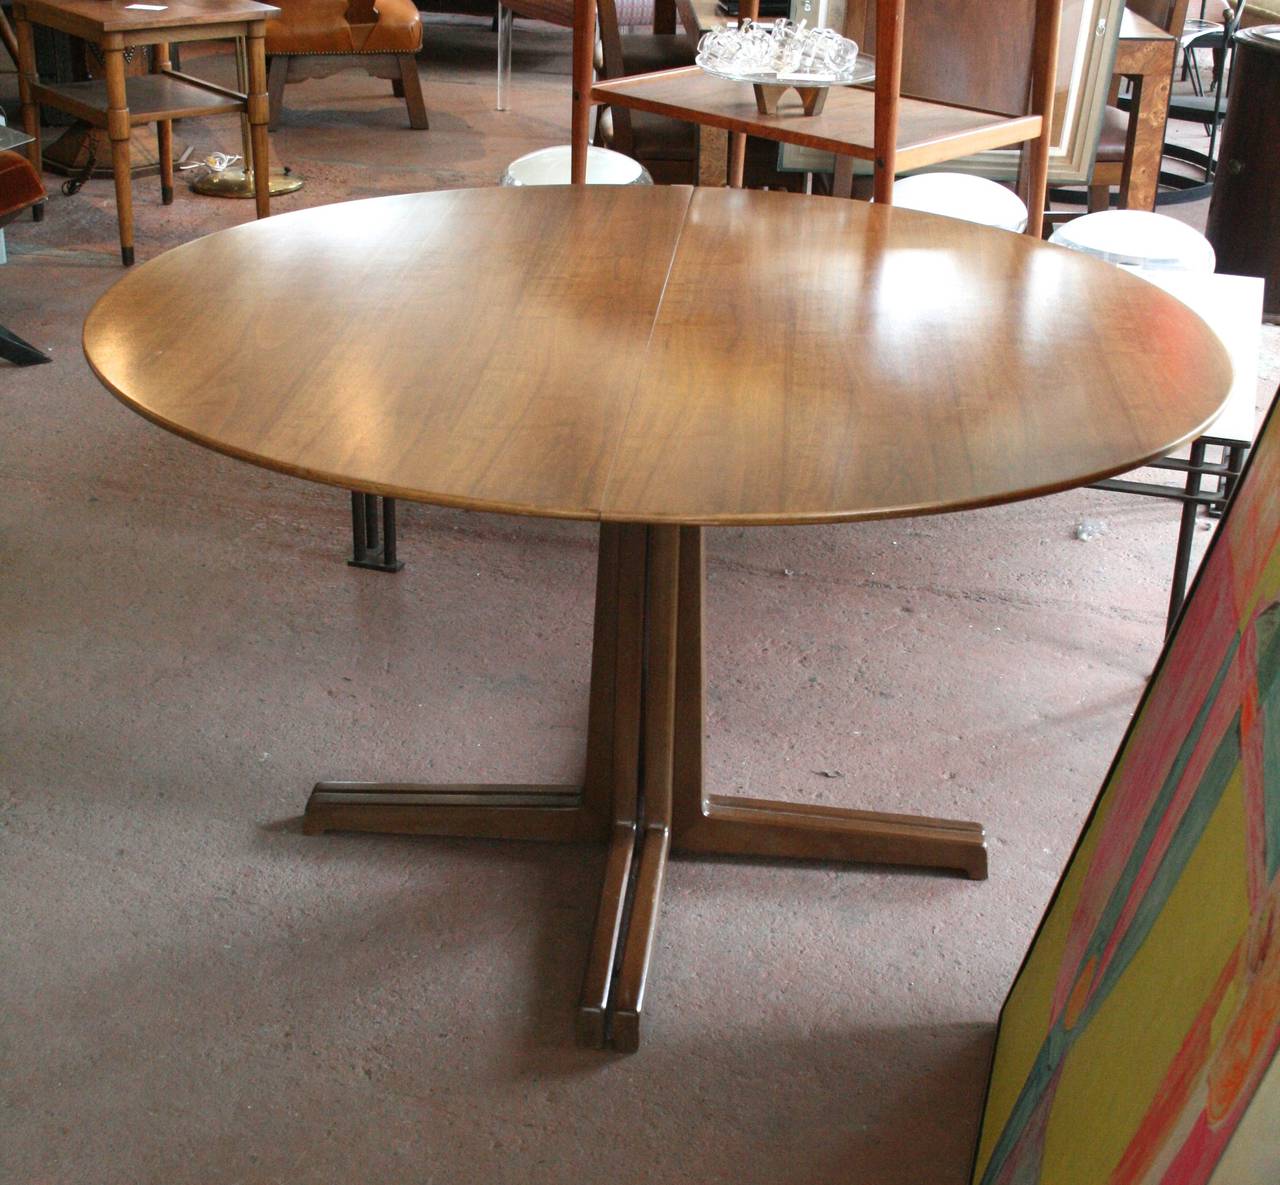 Lovely early Edward Wormley walnut extension dining table with its two leaves and original tag. Gorgeous age and color.